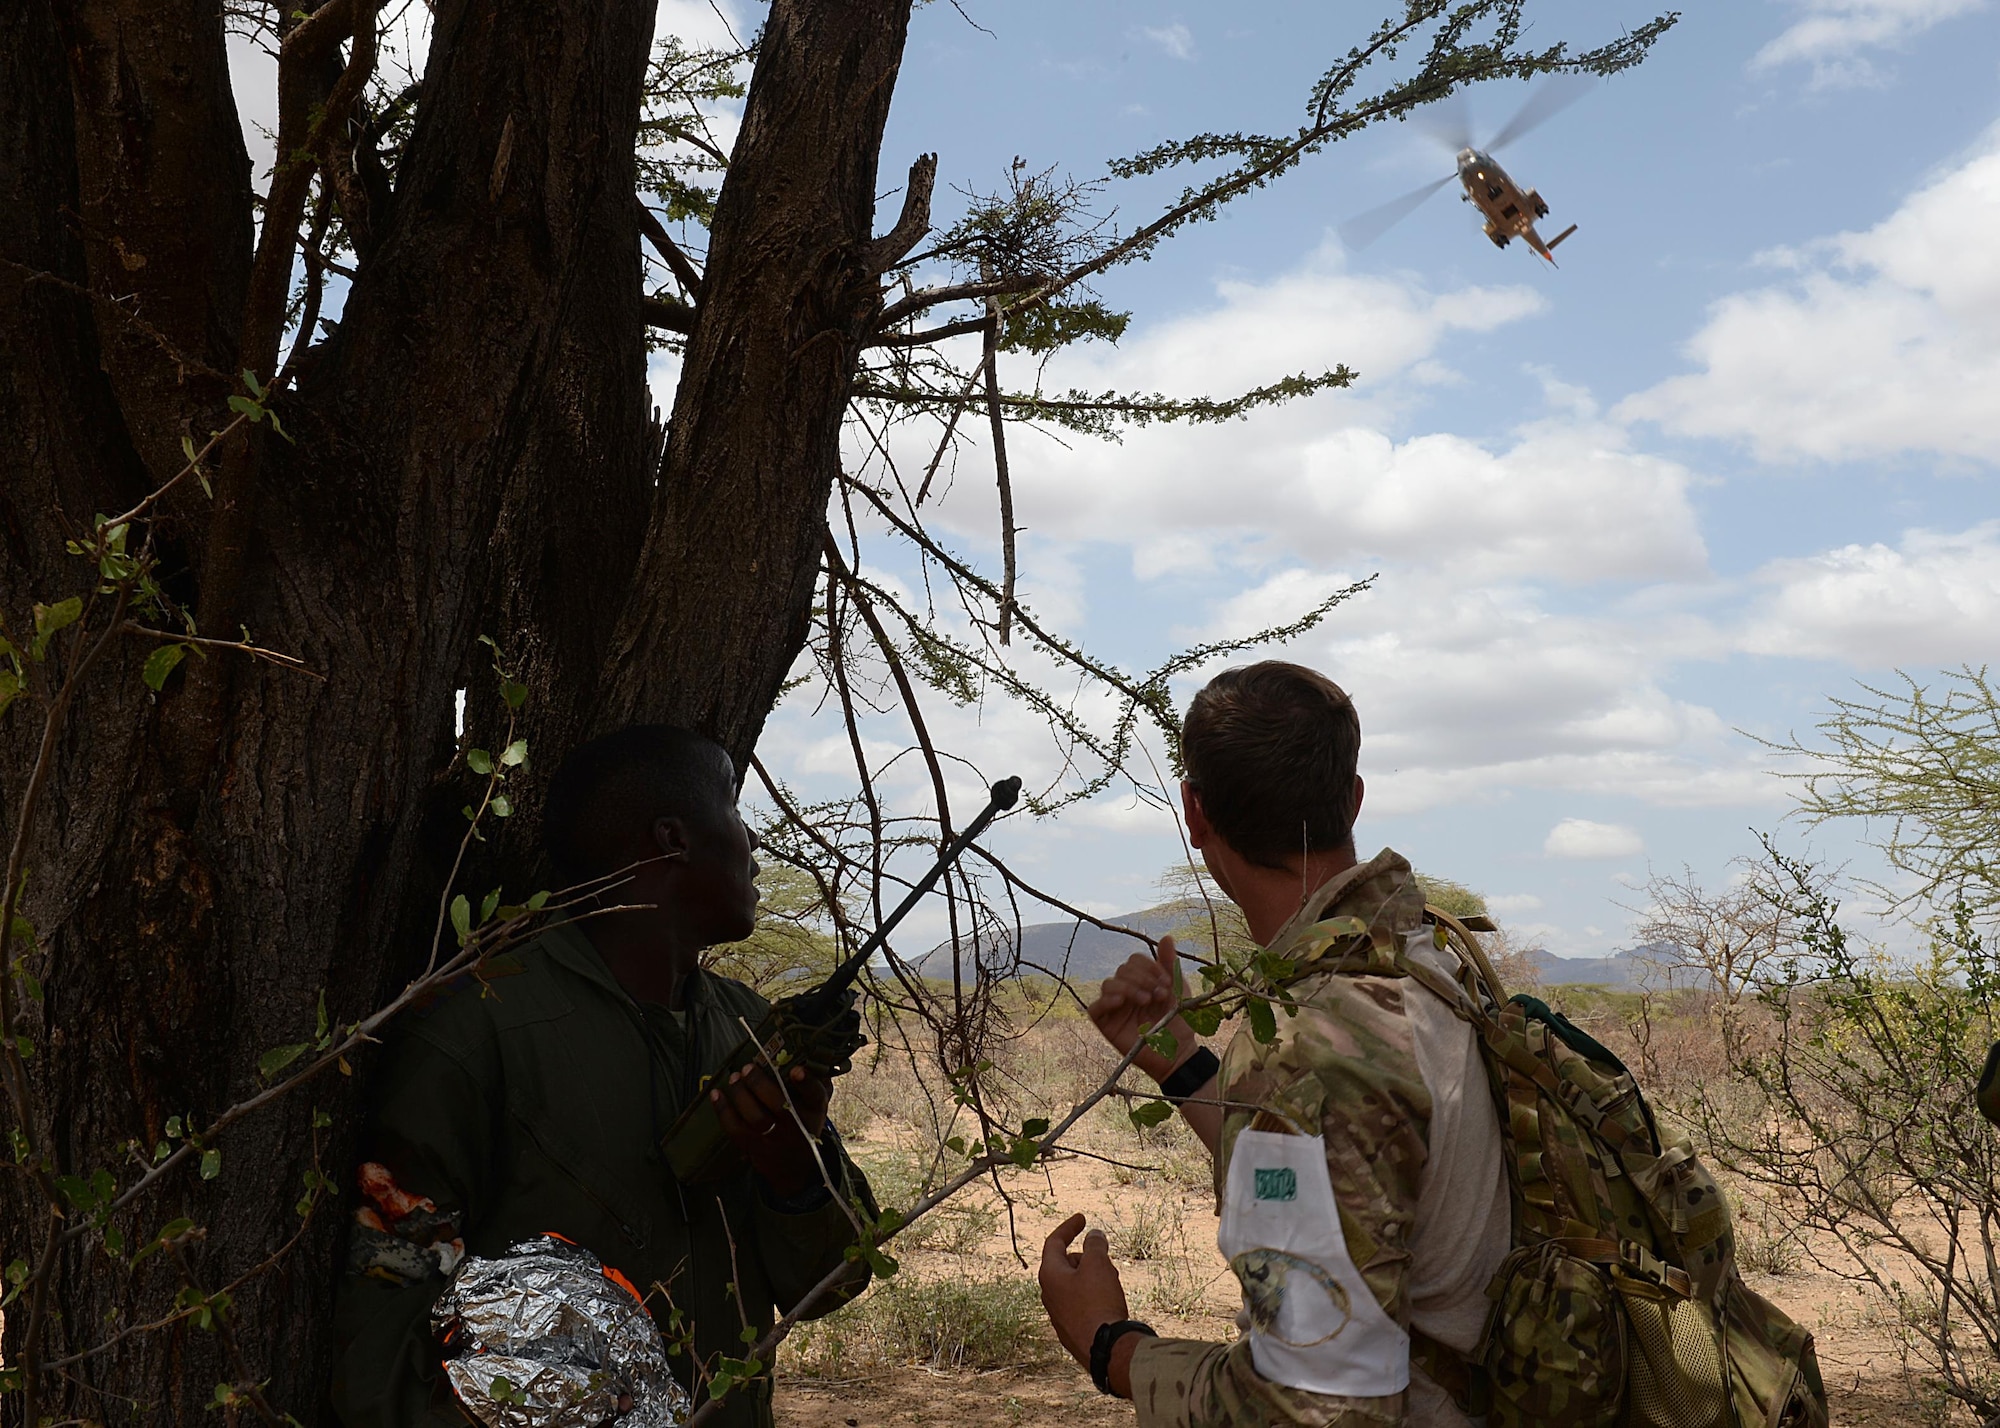 (From left) A Kenyan Defense Force airmen and U.S. Air Force Senior Airman Ian Khun, 82nd Expeditionary Rescue Squadron, survival evasion resistance and escape specialist, watch a helicopter during a hands-on scenario for African Partnership Flight Kenya June 28, 2016 at Archers Post, Kenya.  The APF included a Kenyan-led exercise, Linda Rhino, in which instructors observed the application of what was learned in the classroom and provided feedback. The exercise included multiple personnel recovery scenarios. (U.S. Air Force photo by Tech. Sgt. Evelyn Chavez/Released)